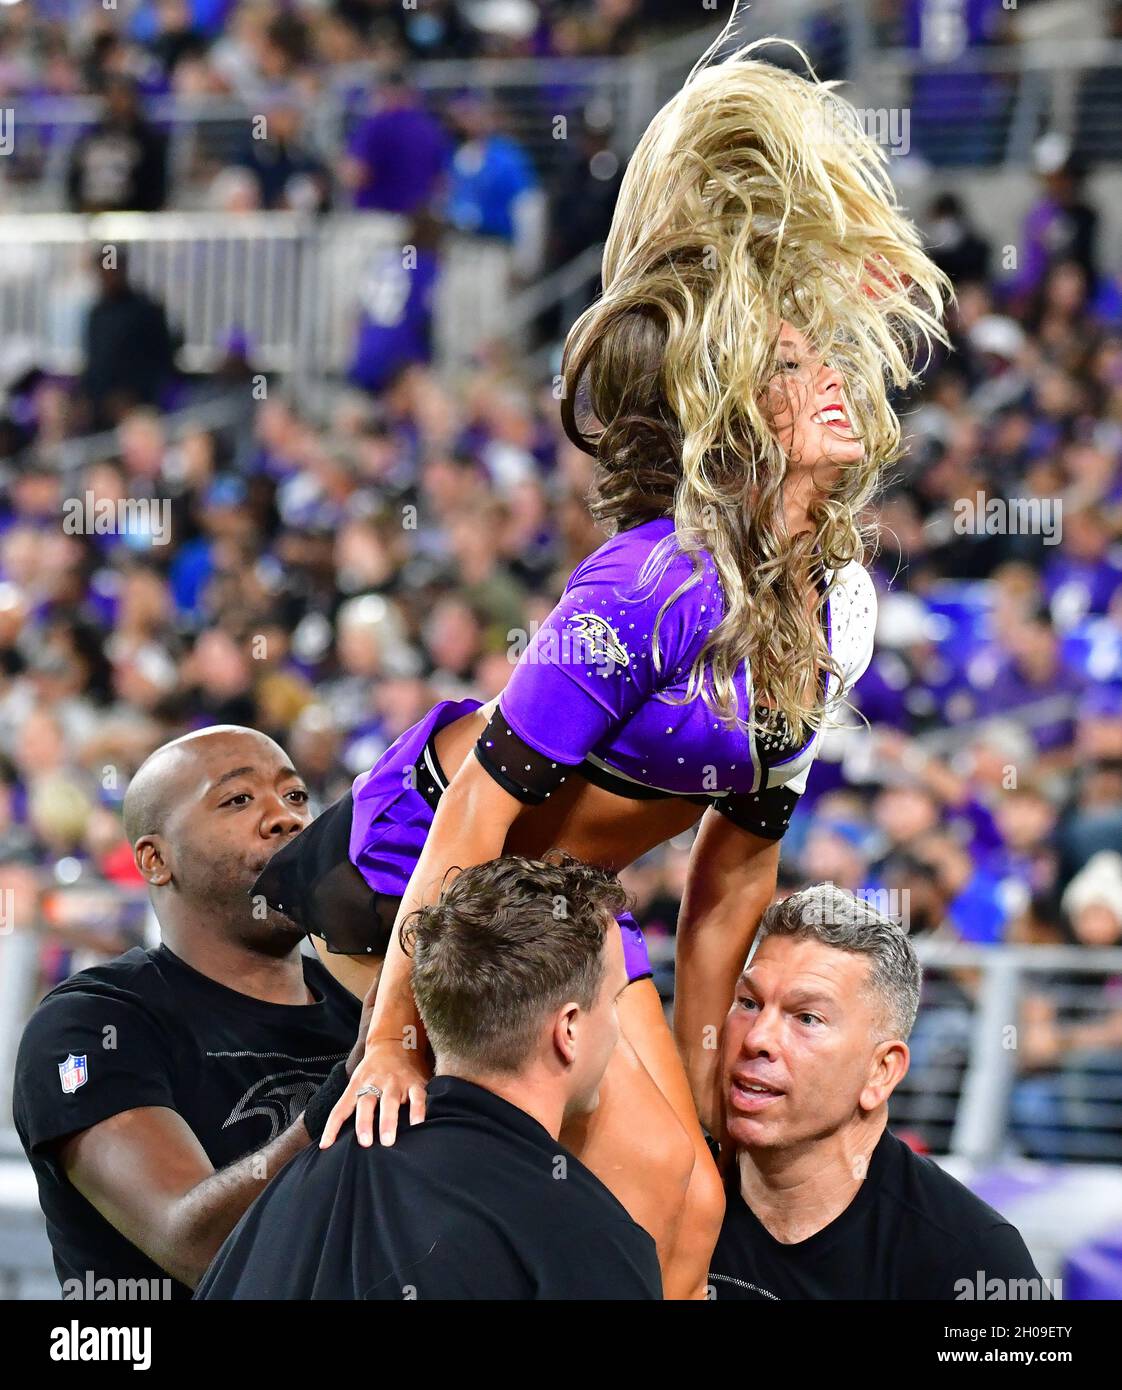 Baltimore, United States. 12th Oct, 2021. Baltimore Ravens cheerleaders perform during the second half at M&T Bank Stadium in Baltimore, Maryland, on Monday, October 11, 2021. The Ravens defeated the Colts 31-25. Photo by David Tulis/UPI Credit: UPI/Alamy Live News Stock Photo